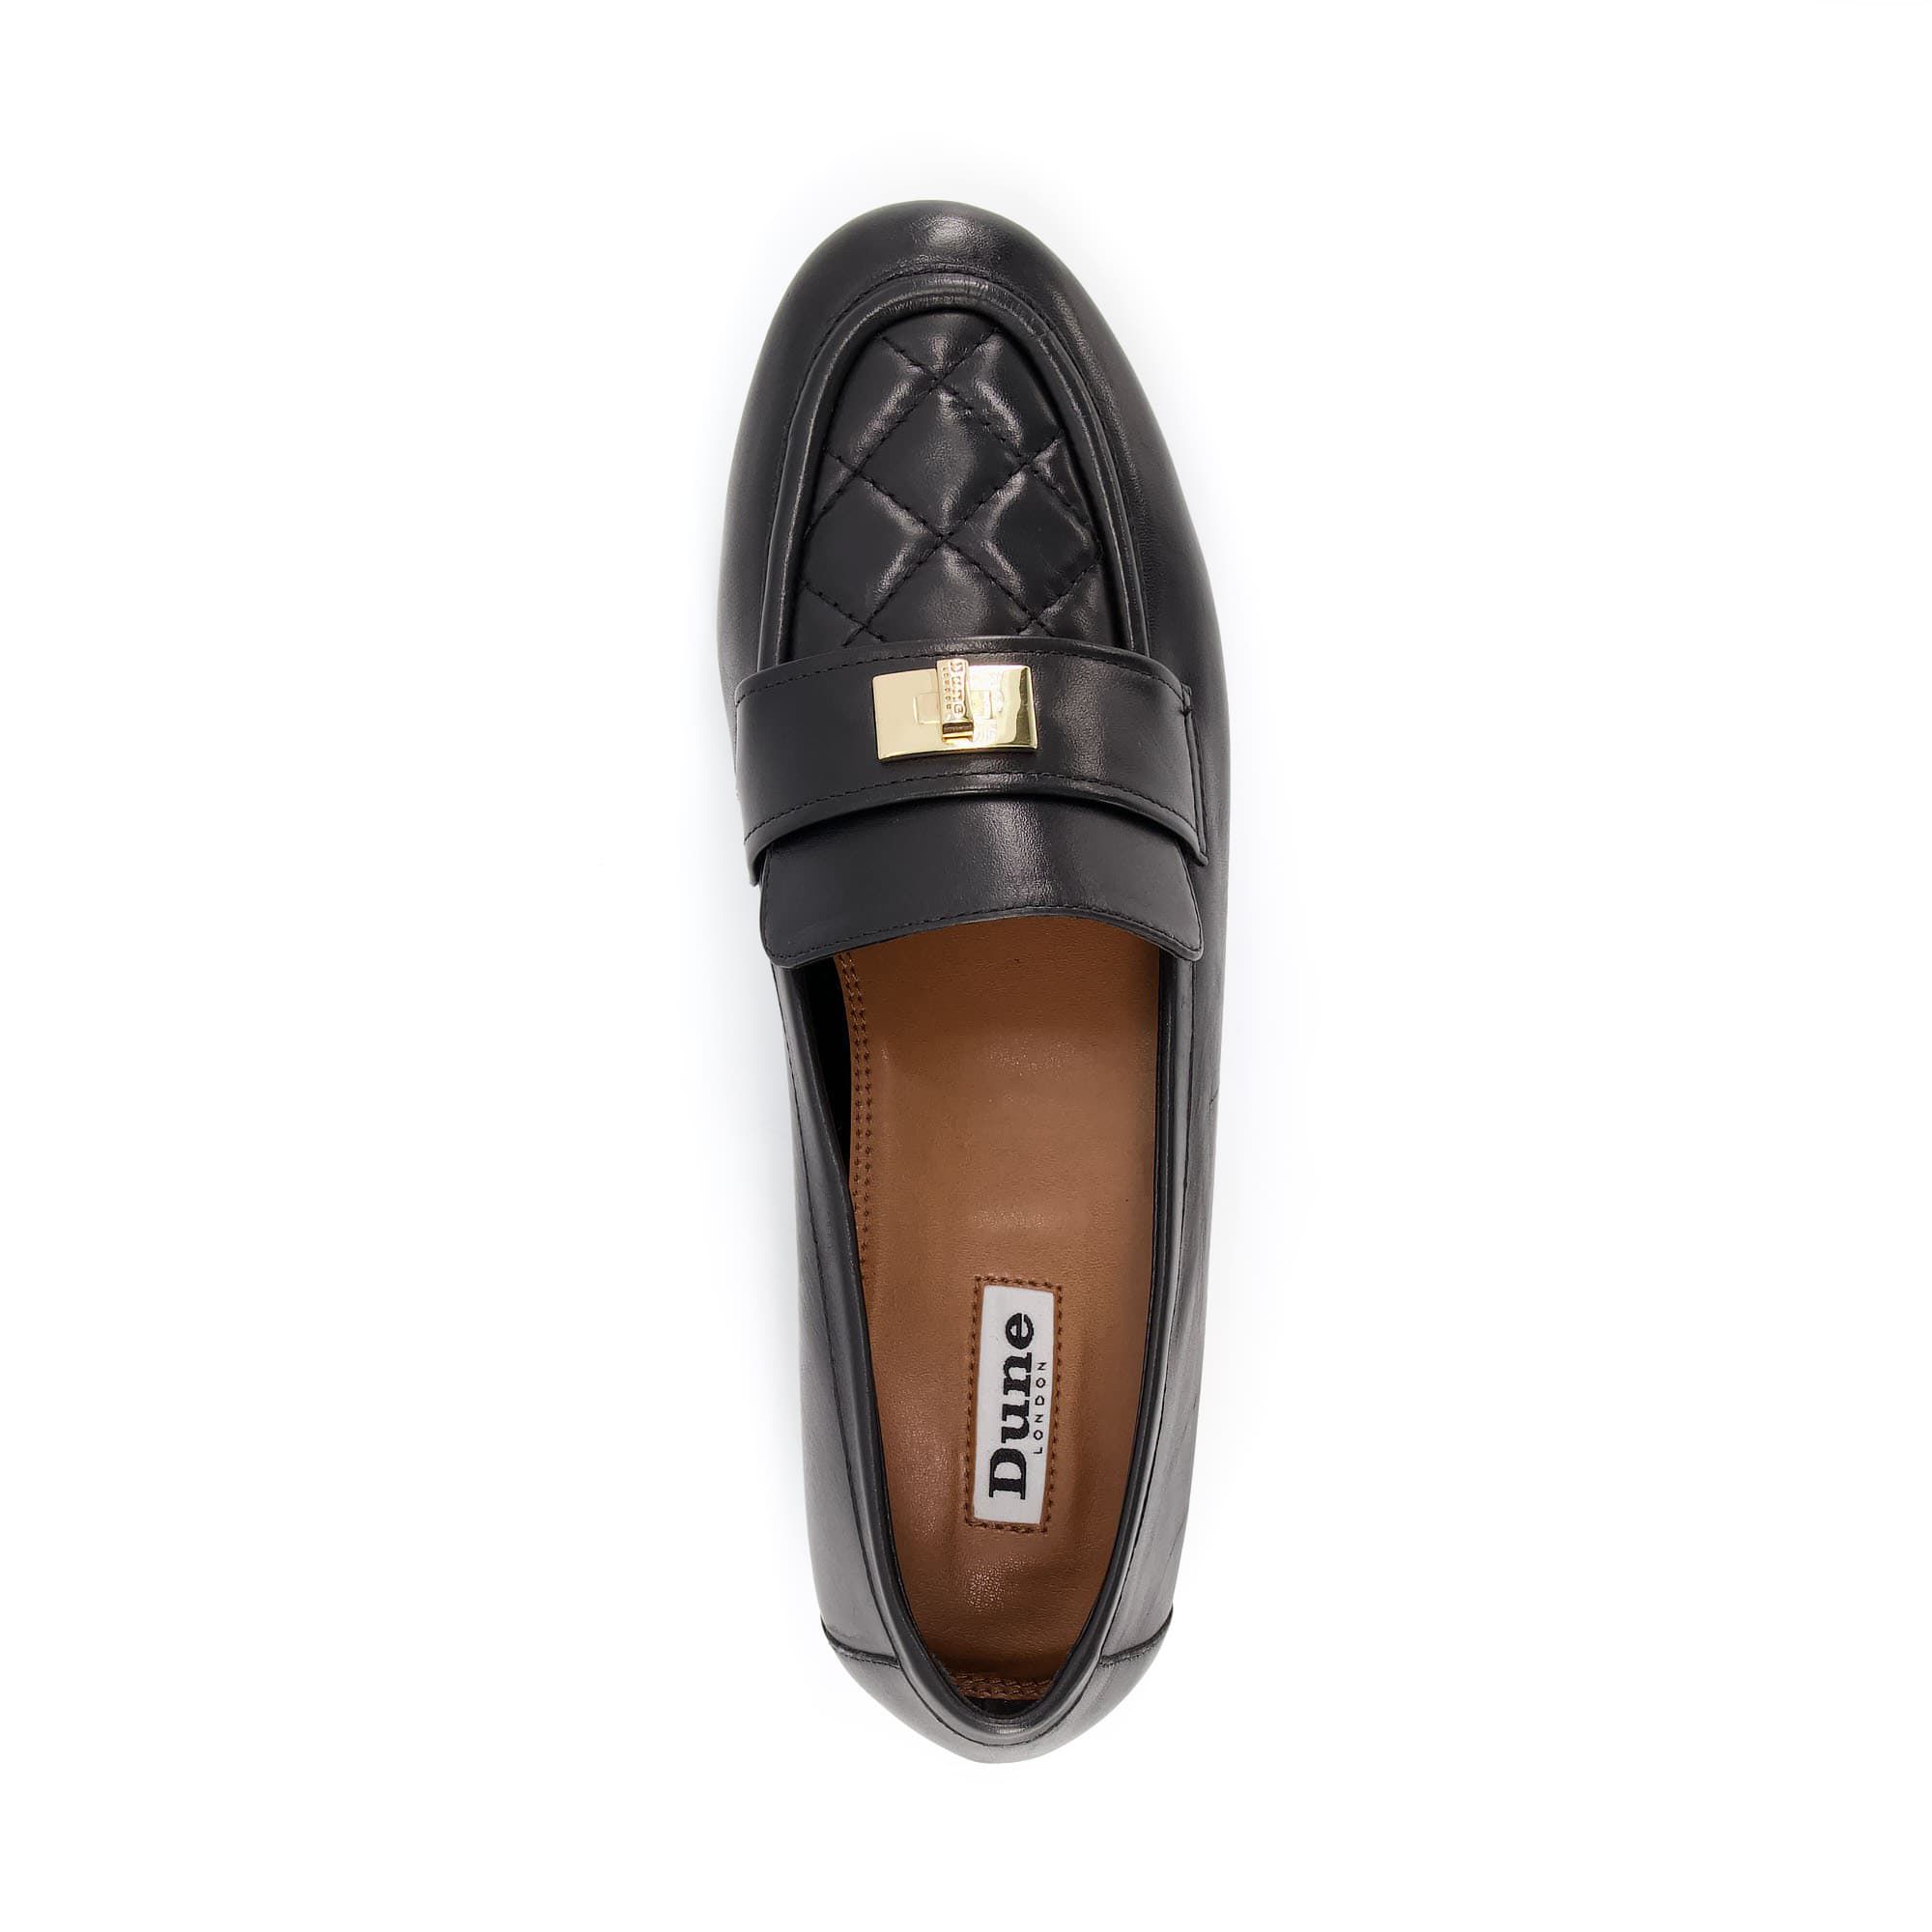 Style-up your smart looks with these quilted loafers. Comfortable with a luxurious feel, they'll go great with any outfit.